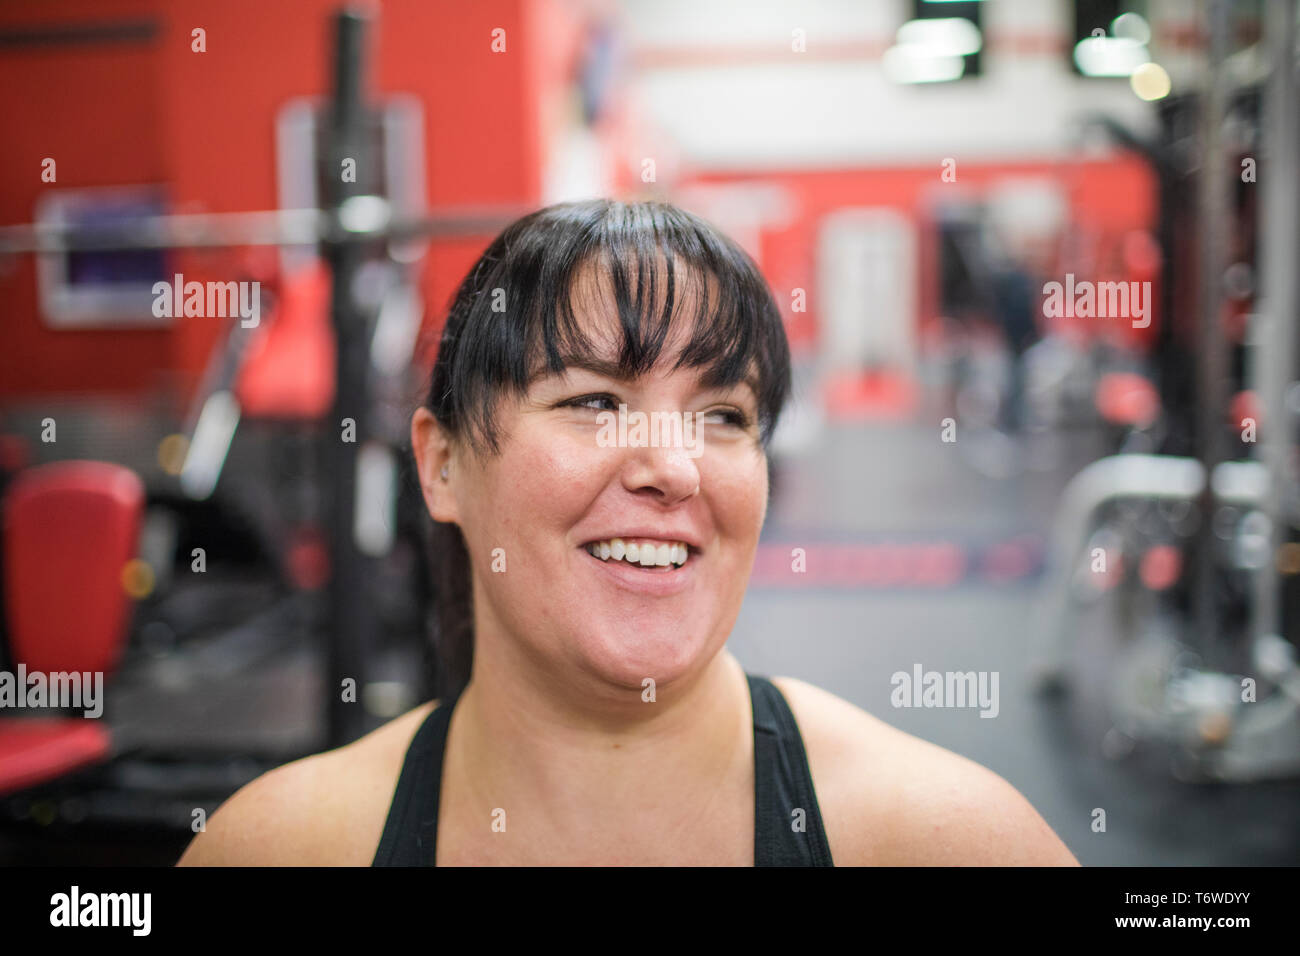 Portrait of woman smiling at gym during workout. Stock Photo